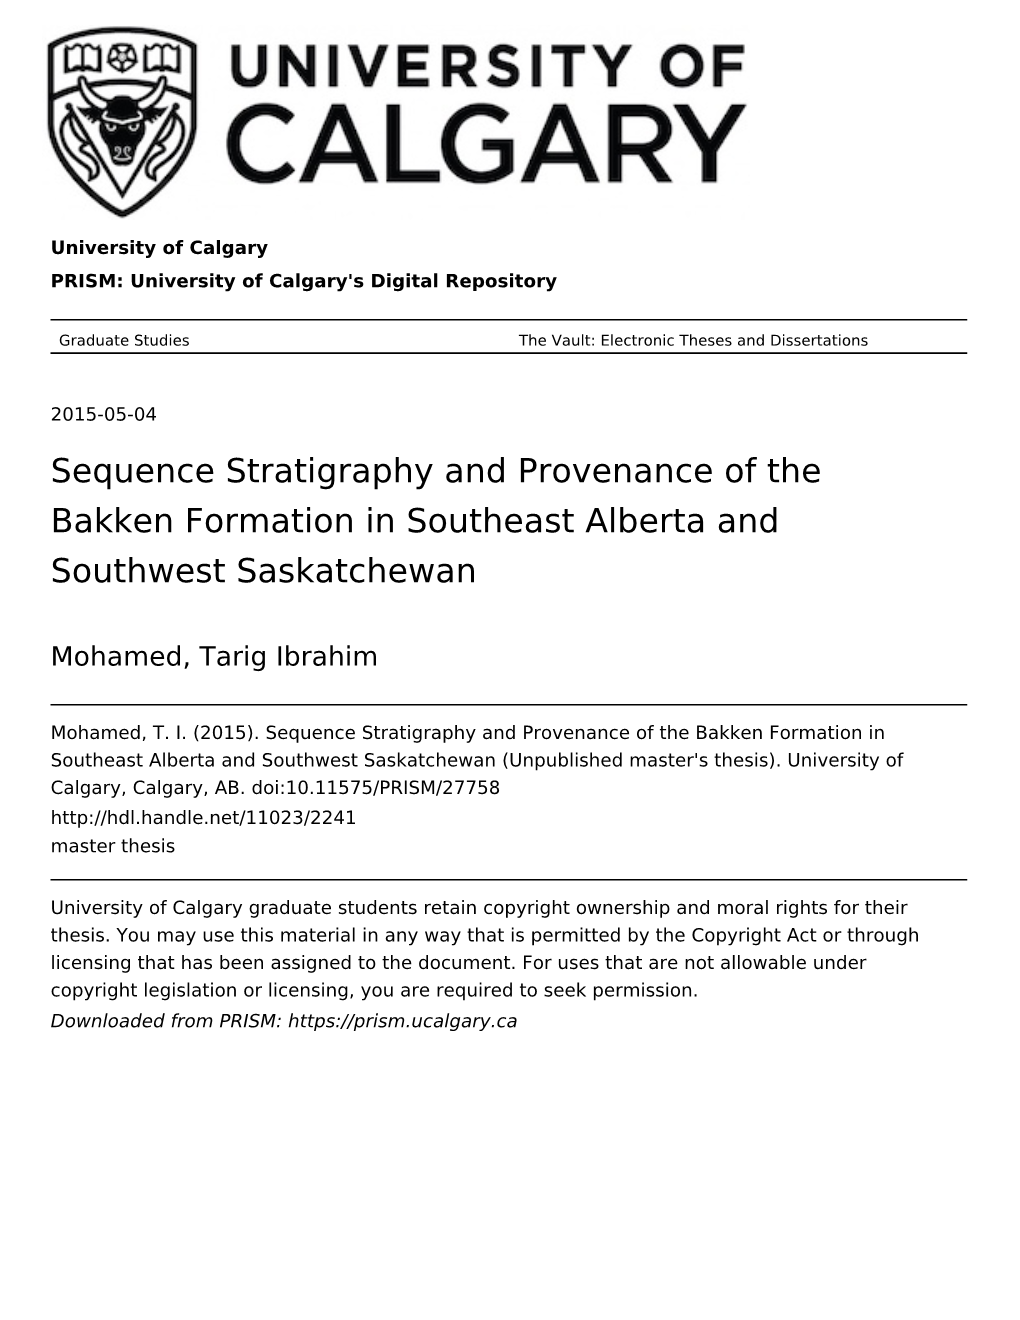 Sequence Stratigraphy and Provenance of the Bakken Formation in Southeast Alberta and Southwest Saskatchewan